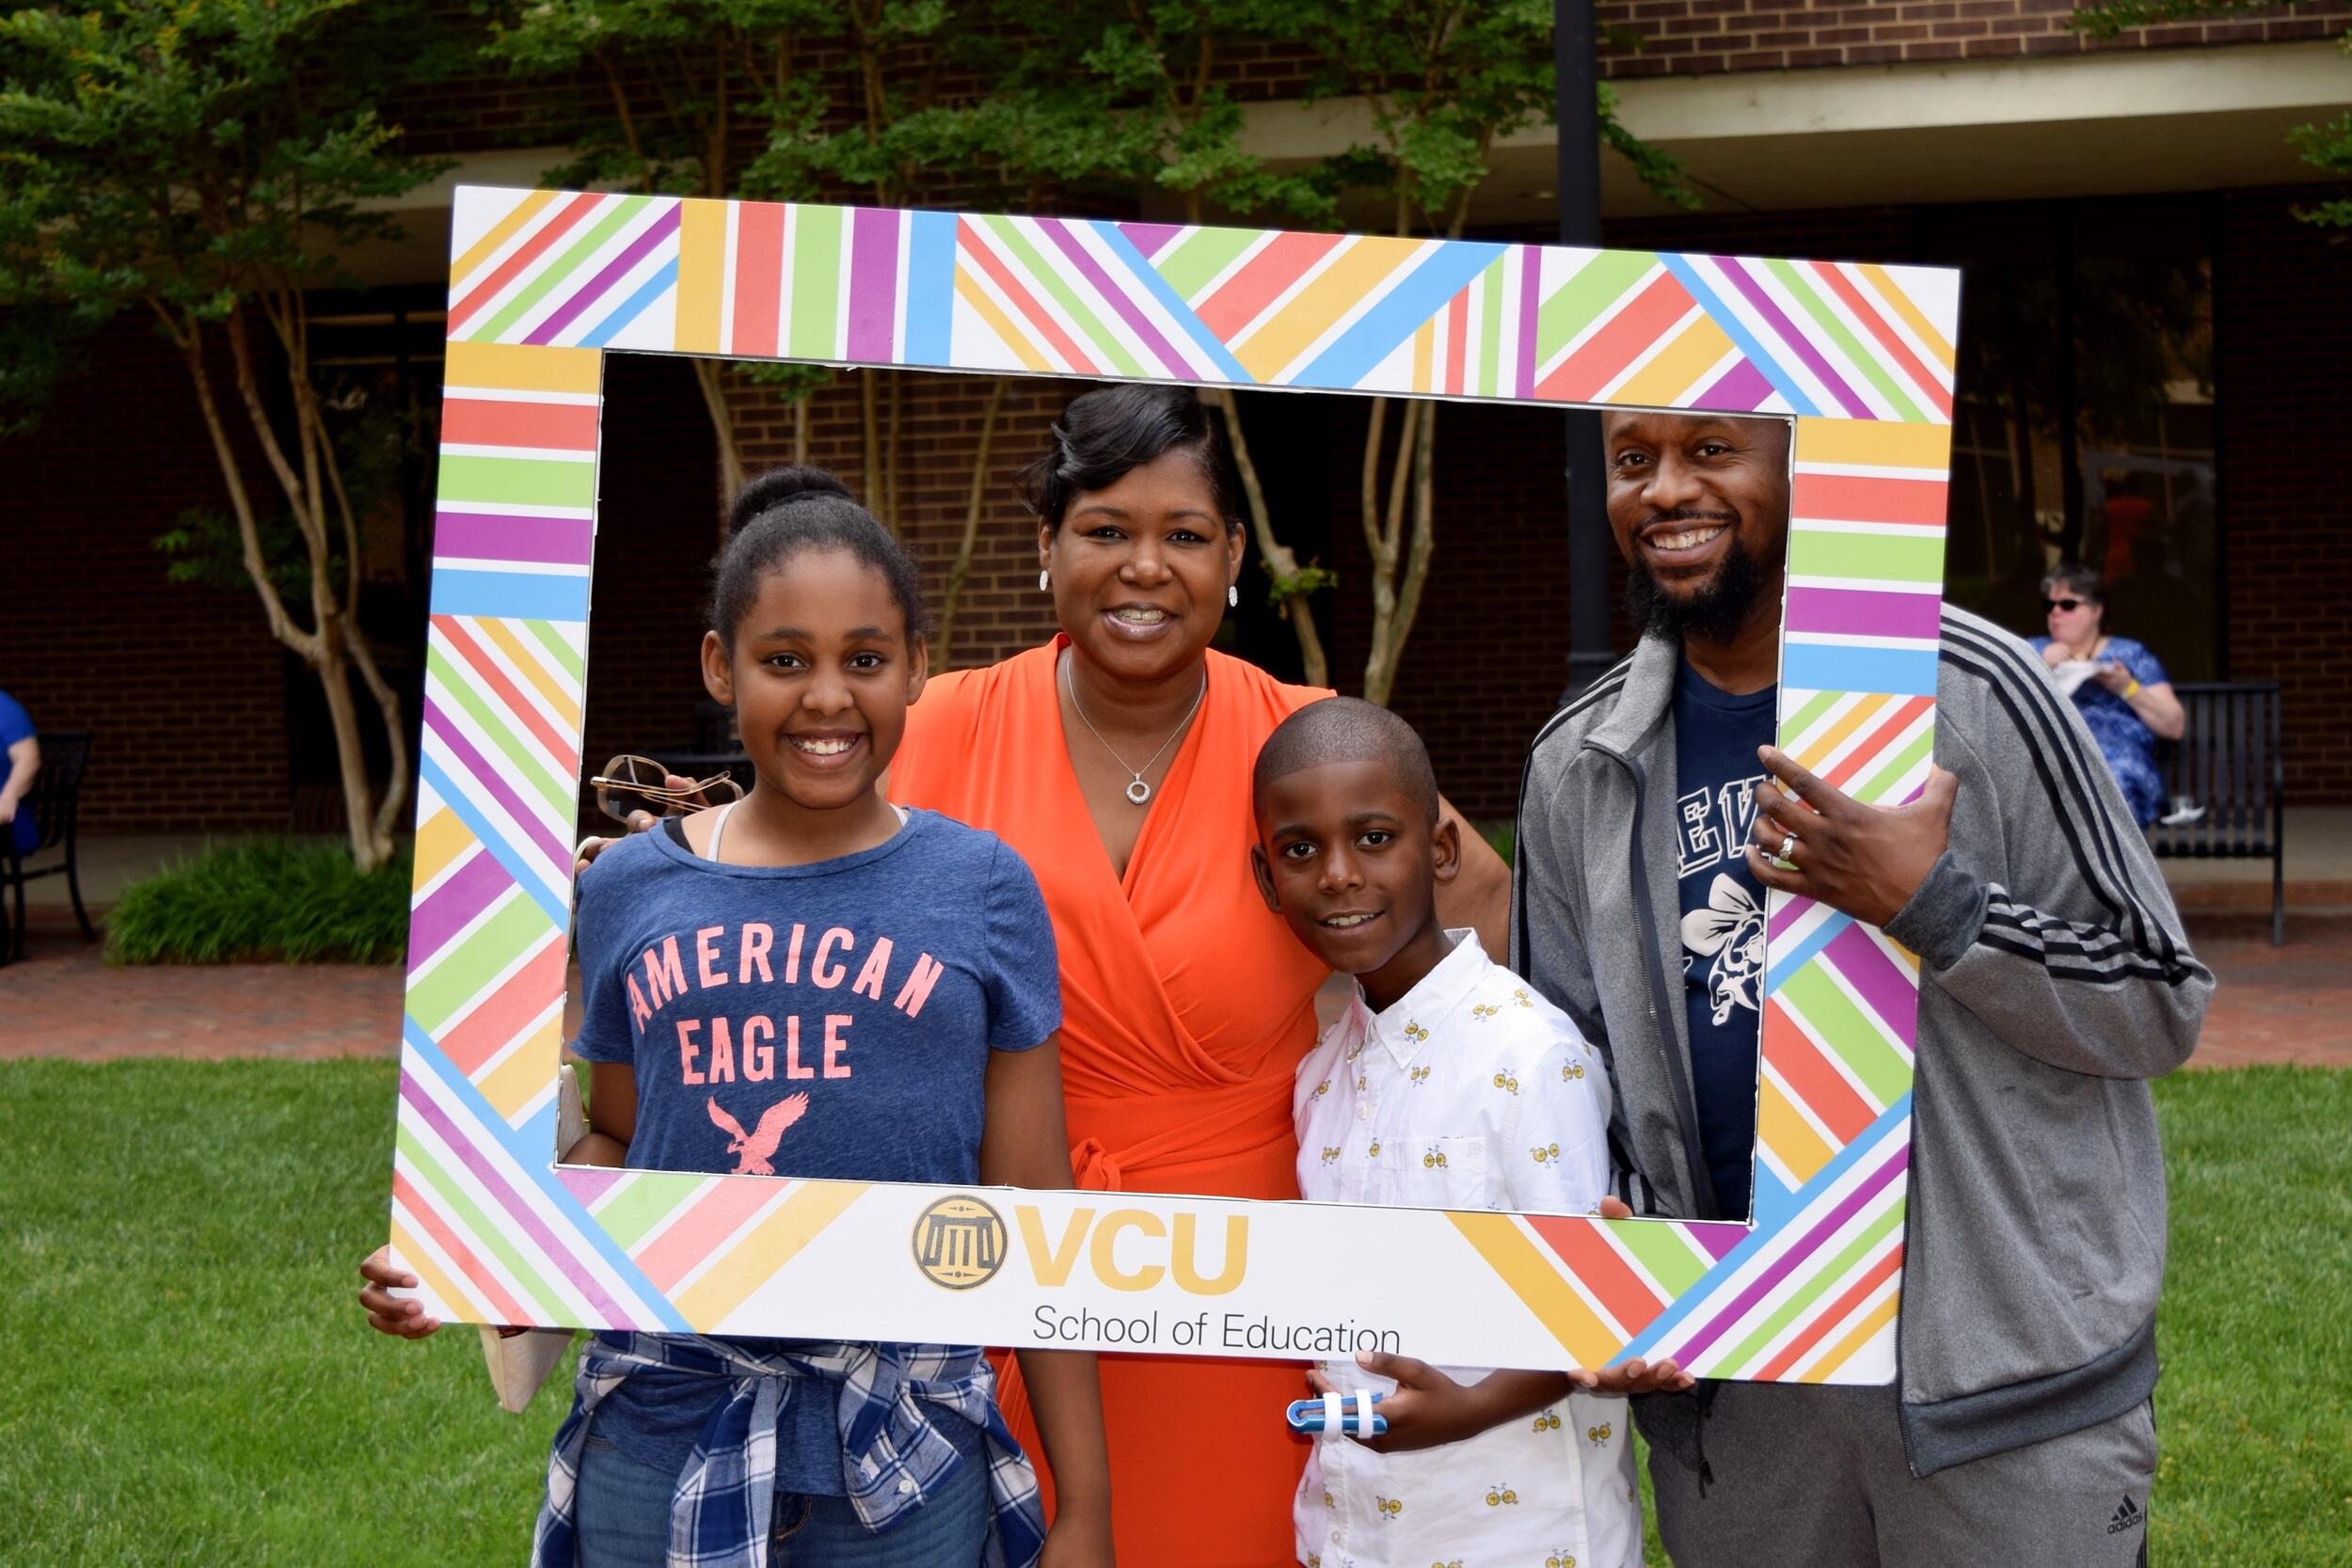 A family pose behind a picture frame with "V C U School of Education" printed on it.